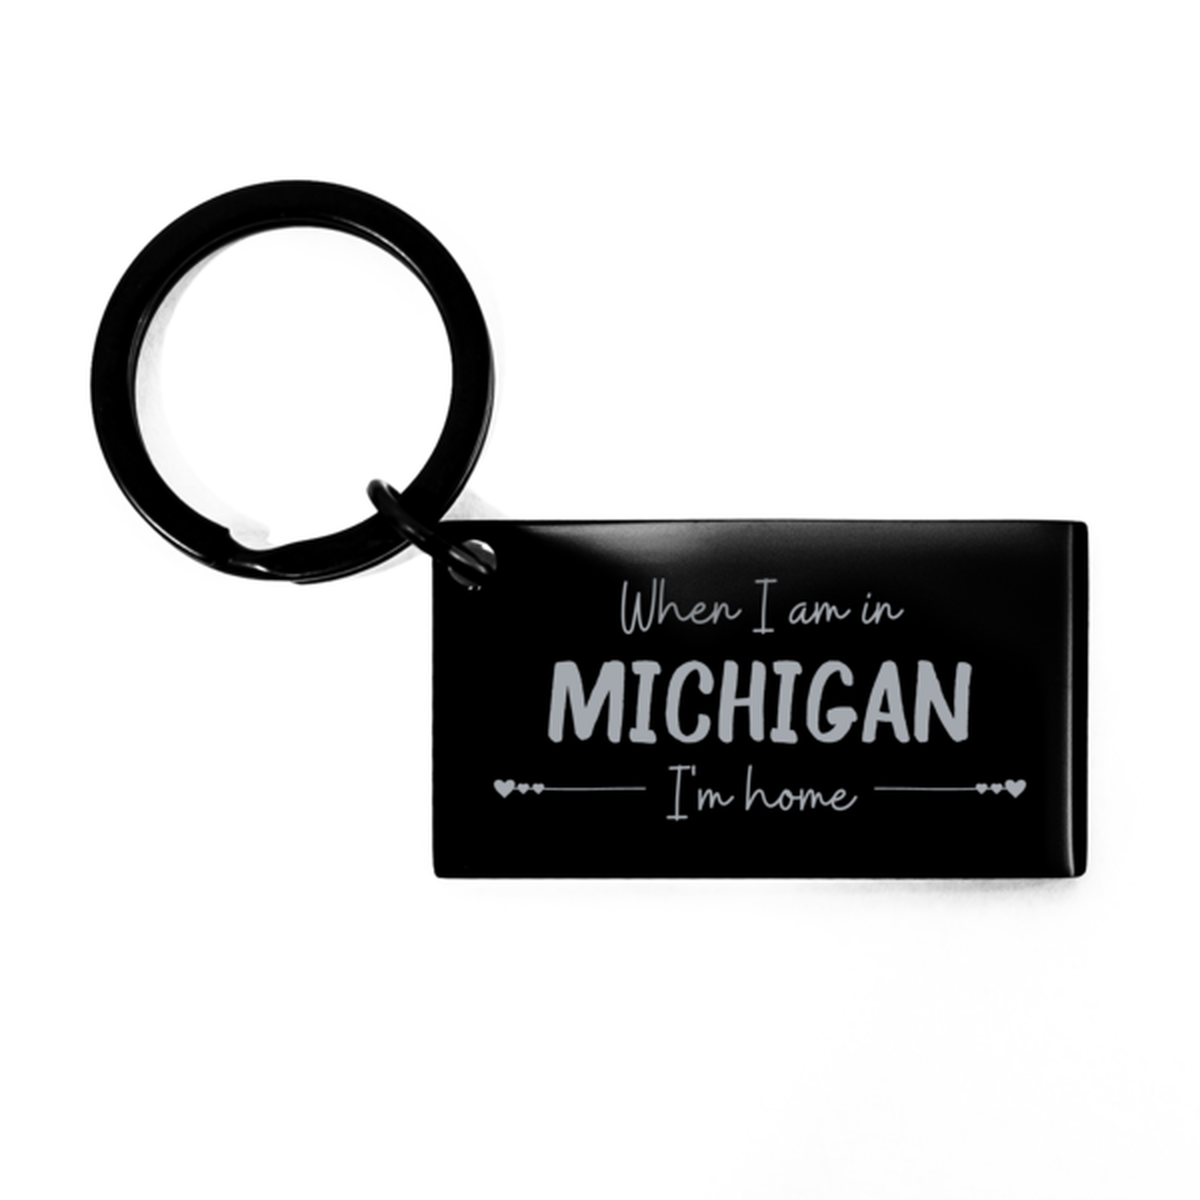 When I am in Michigan I'm home Keychain, Cheap Gifts For Michigan, State Michigan Birthday Gifts for Friends Coworker